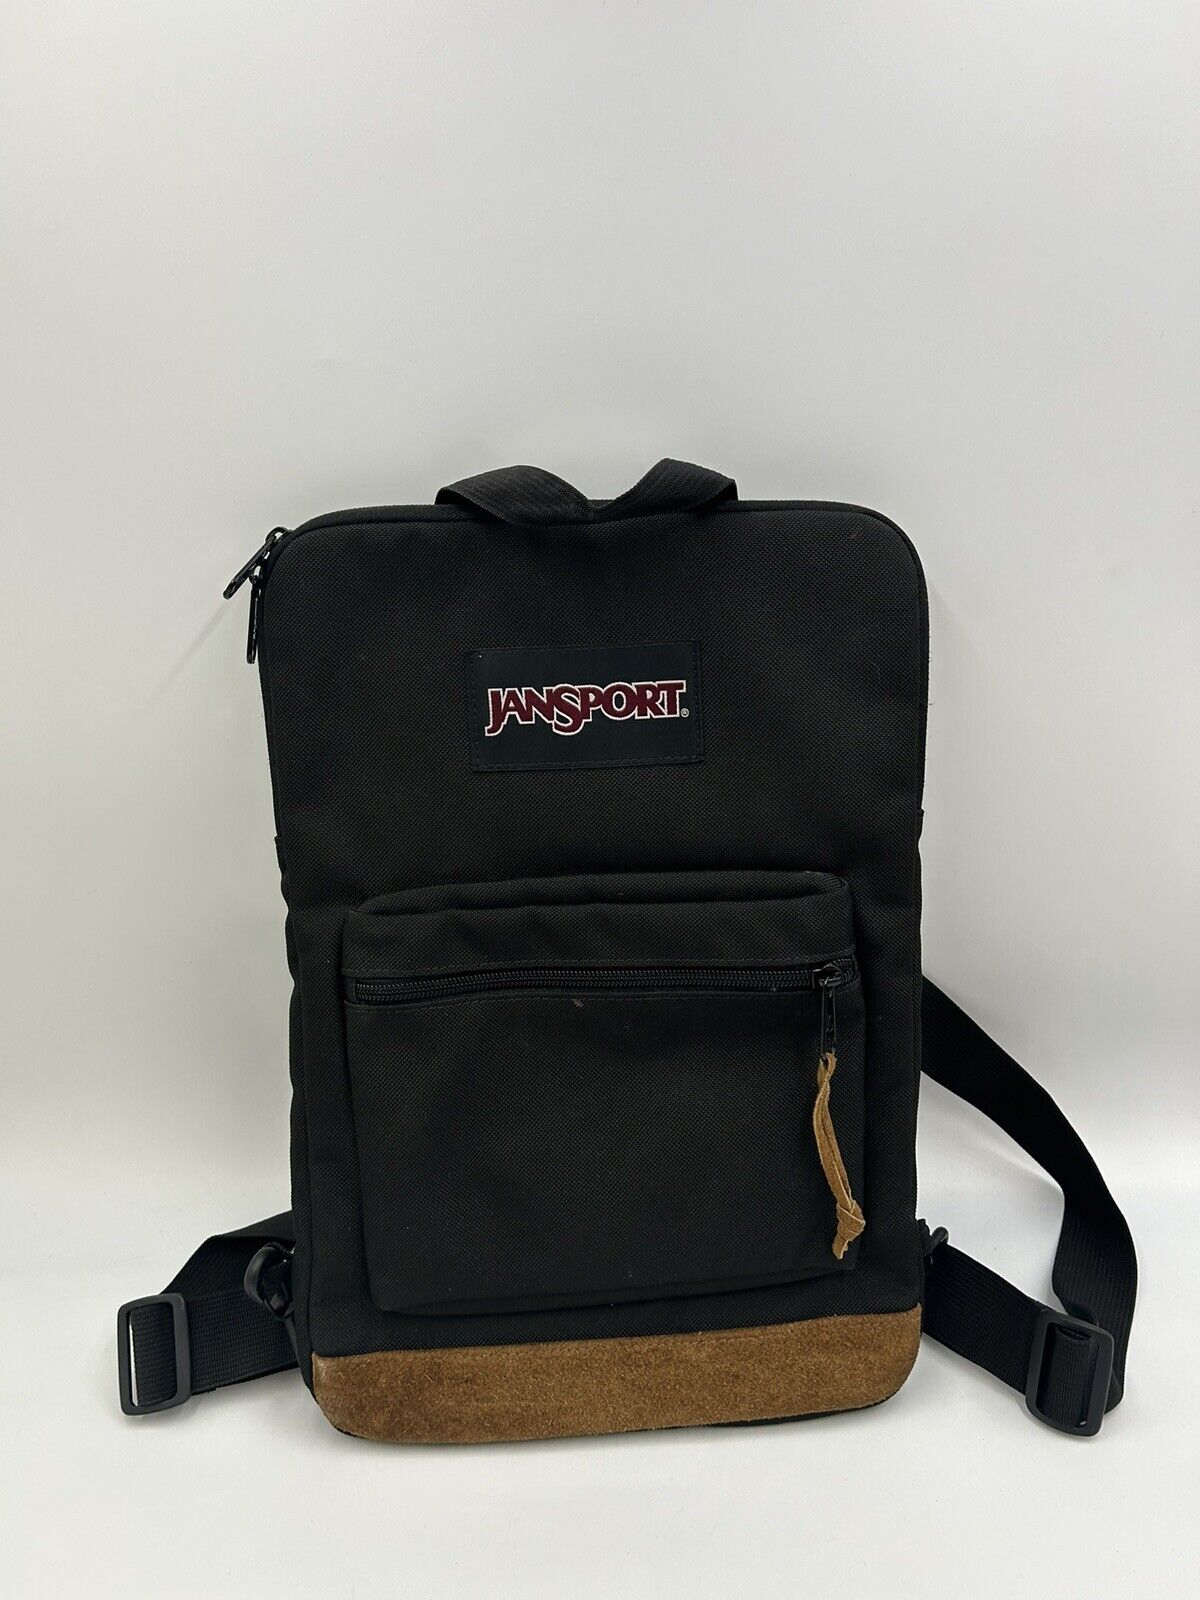 JanSport Right Pack Sleeve Backpack black with leather accent 15” x 10”